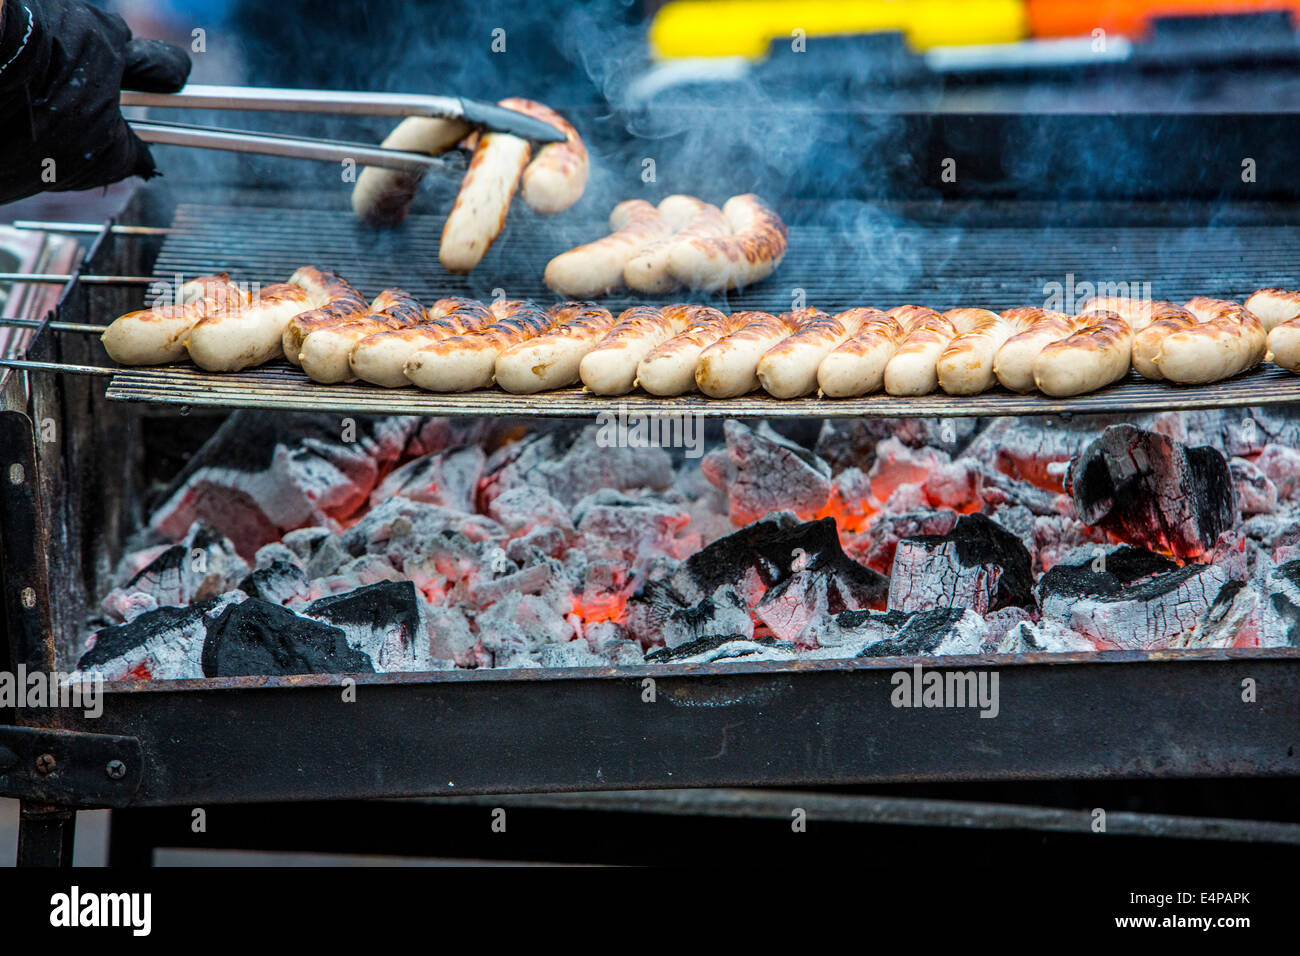 Grill sausages are grilled on a charcoal grill, Stock Photo